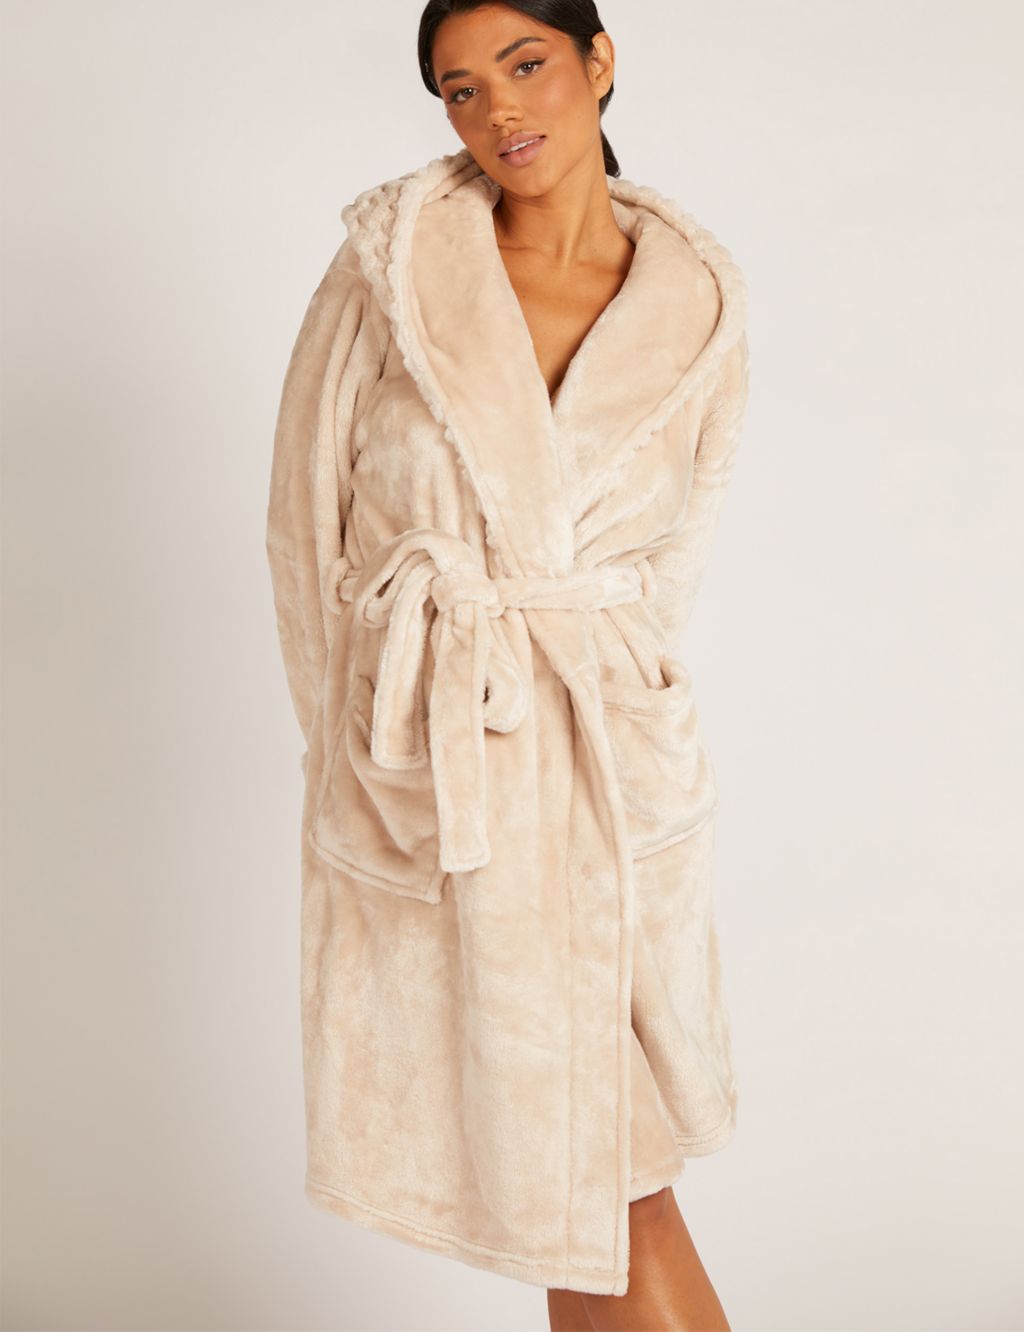 Faux Fur Heart Trim Hooded Dressing Gown image 1